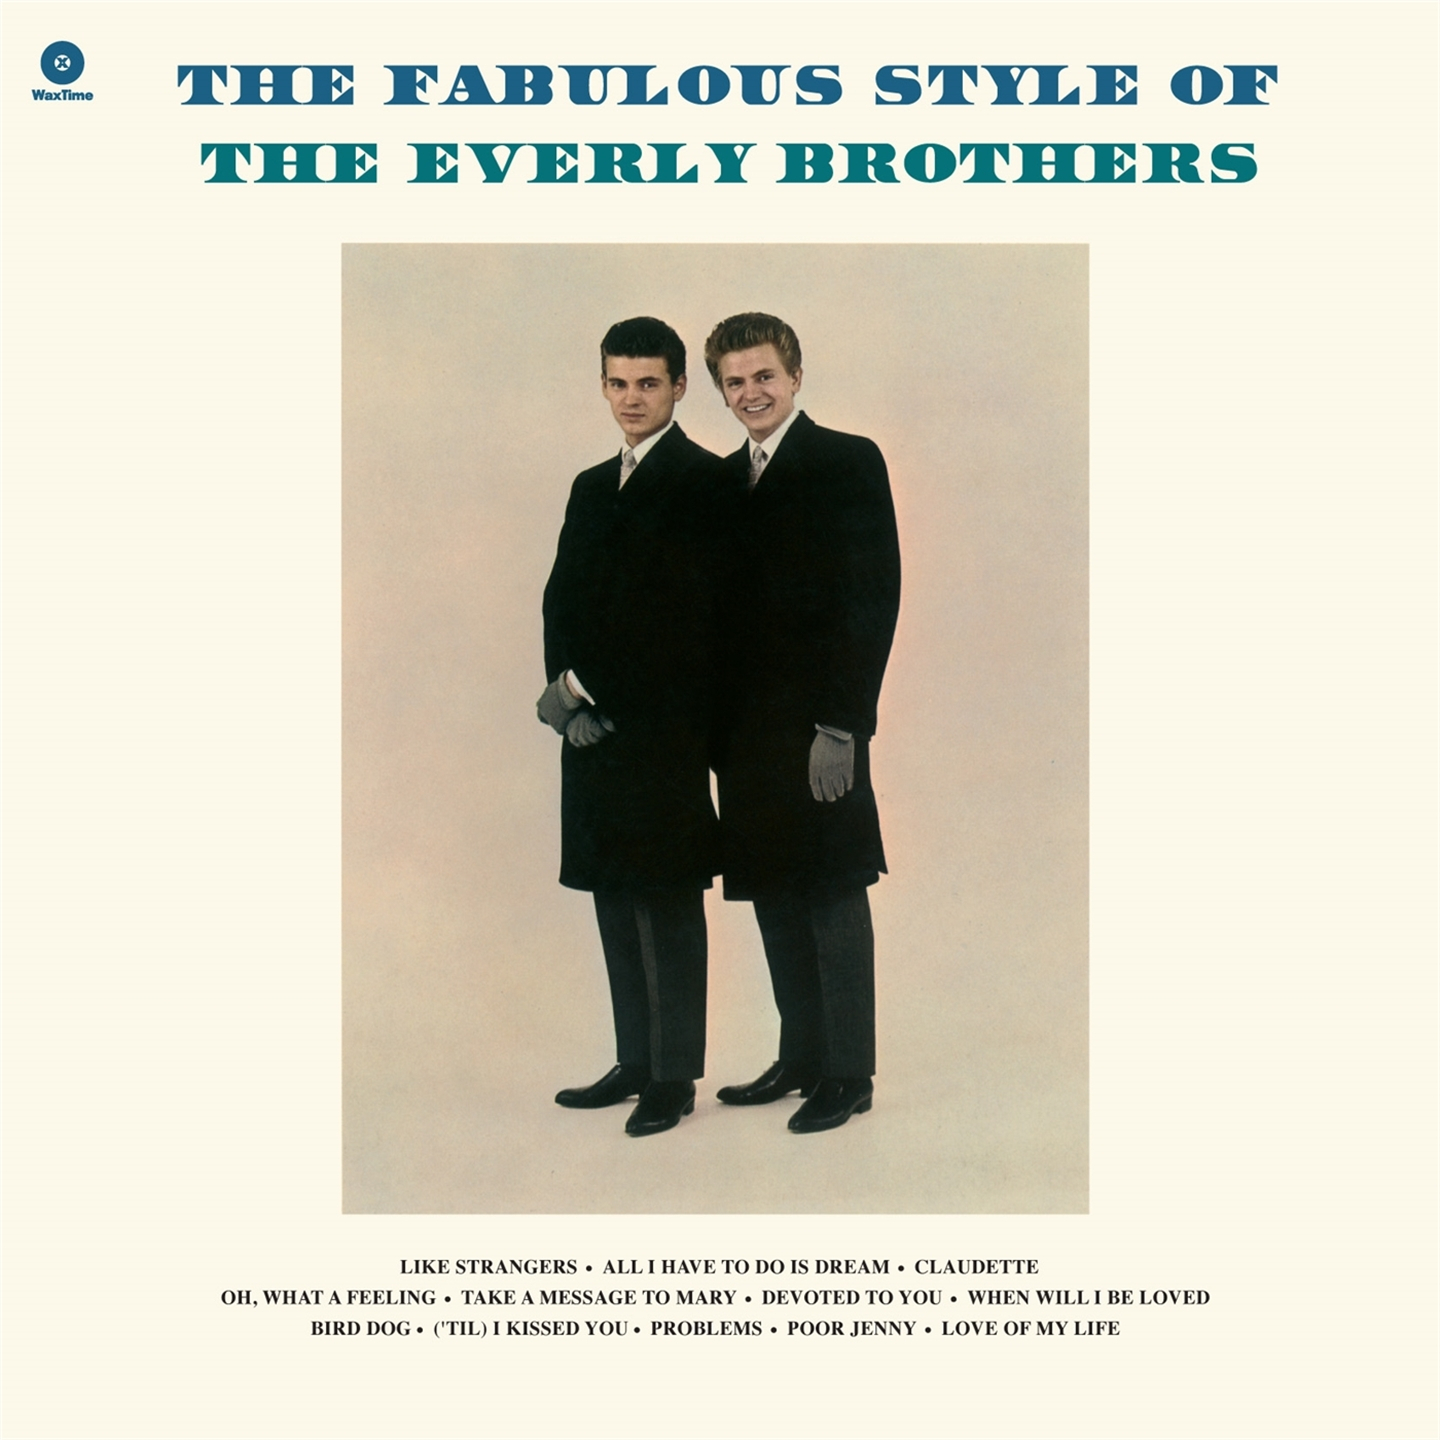 THE FABULOUS STYLE OF THE EVERLY BROTHERS [LP]